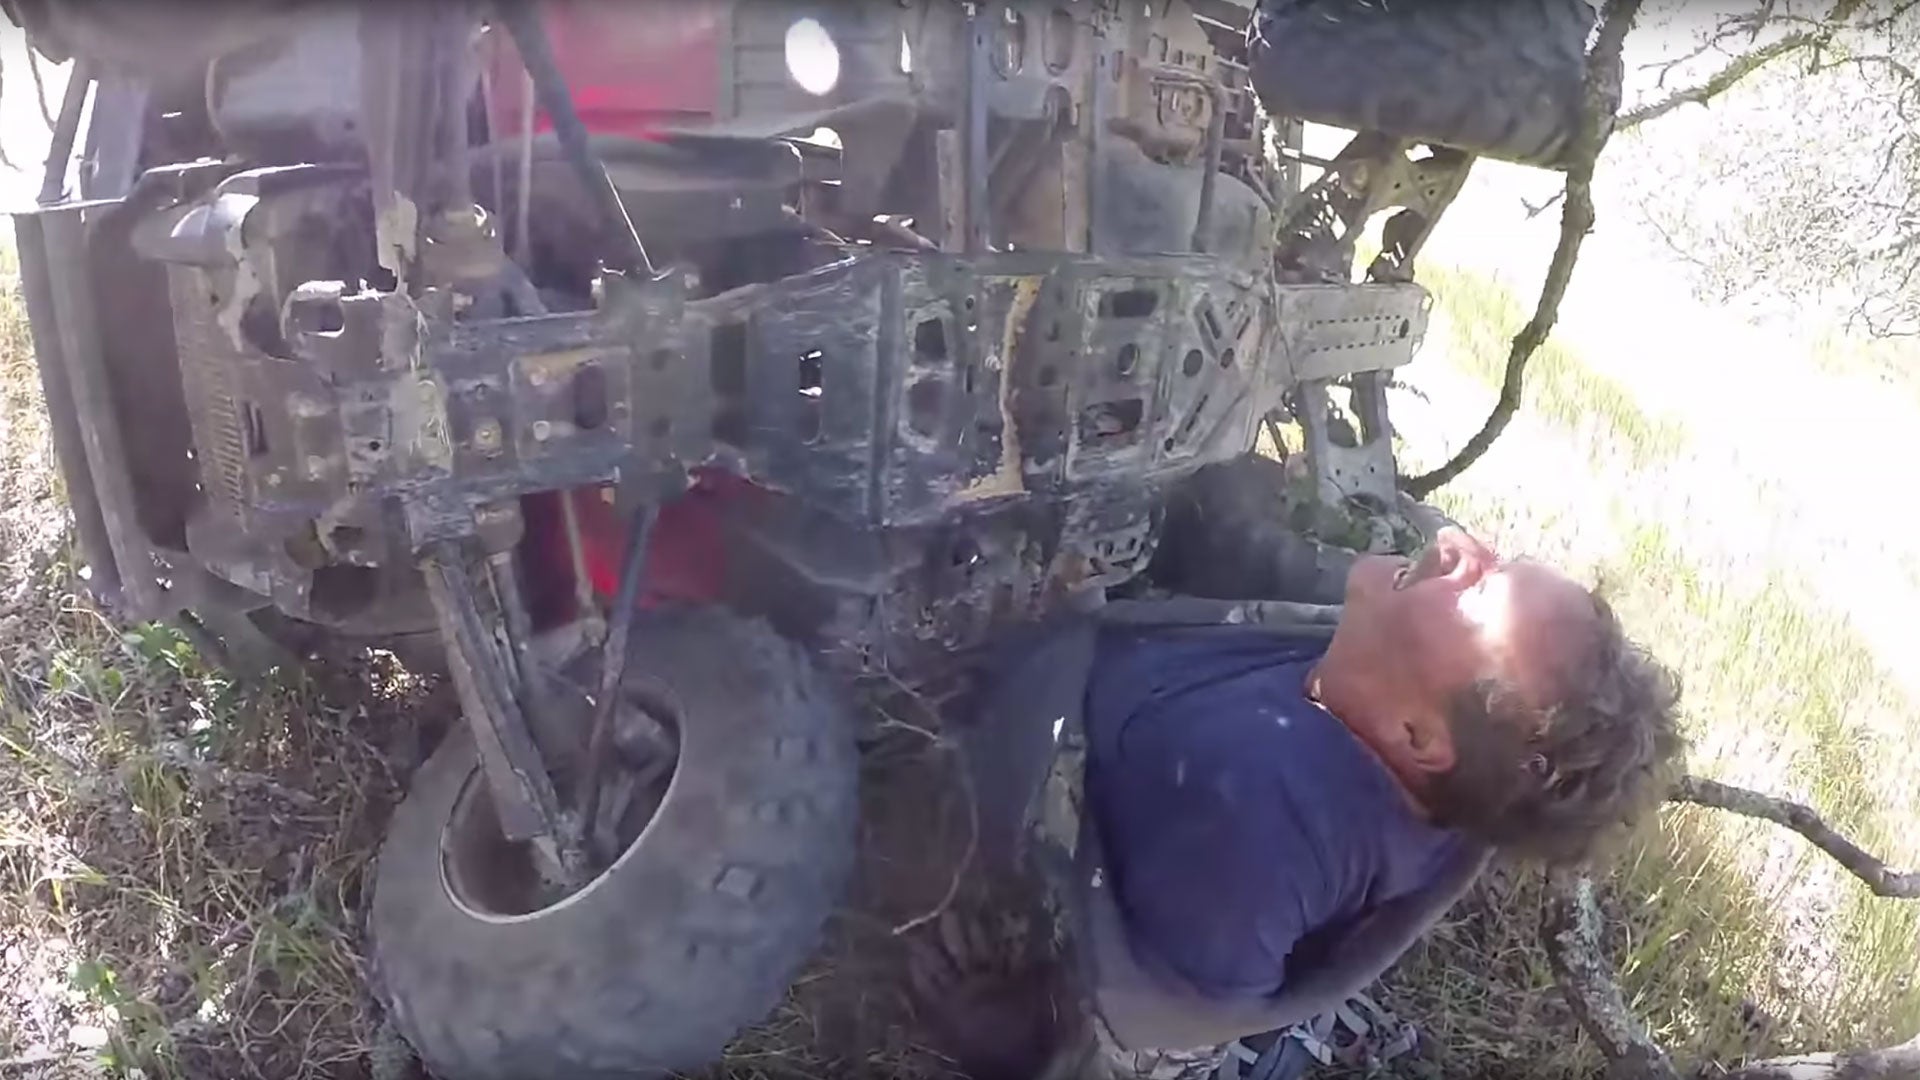 Dirt Biker Frees Pinned ATV Rider, MacGyver-style | The Drive